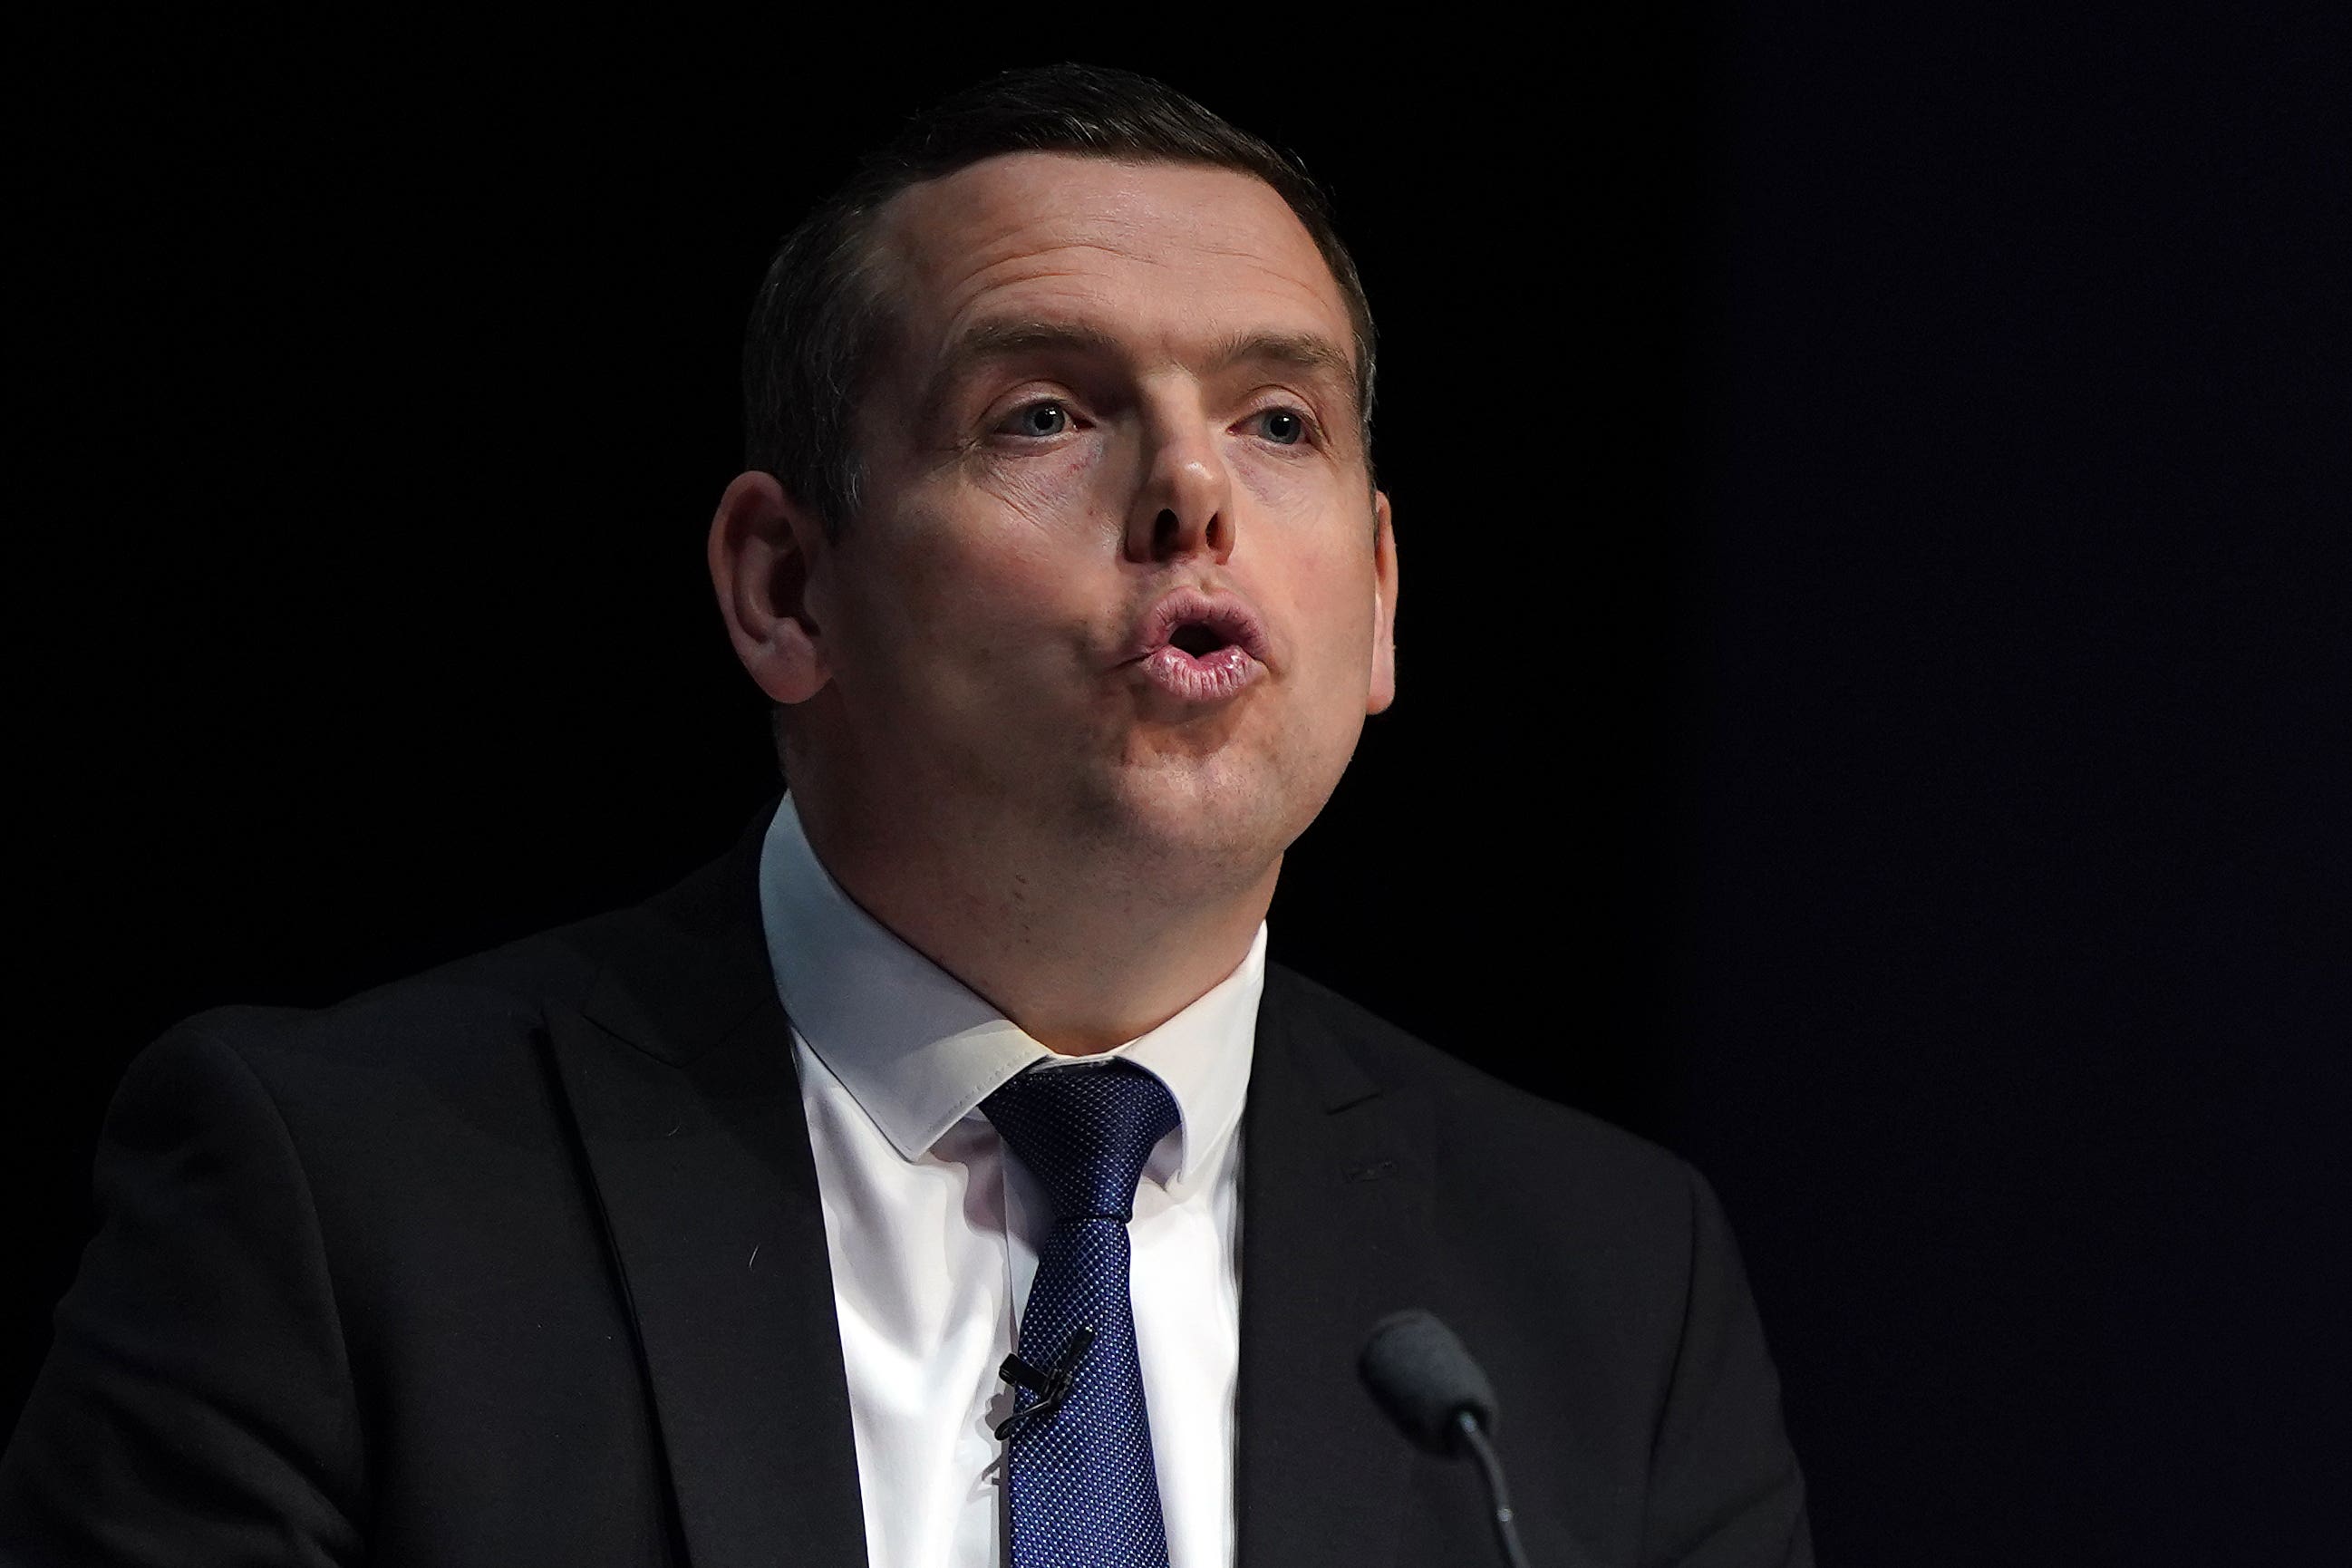 Scottish Conservative leader Douglas Ross insisted his party was ‘focused on Scotland’s real priorities’. (Andrew Milligan/PA)